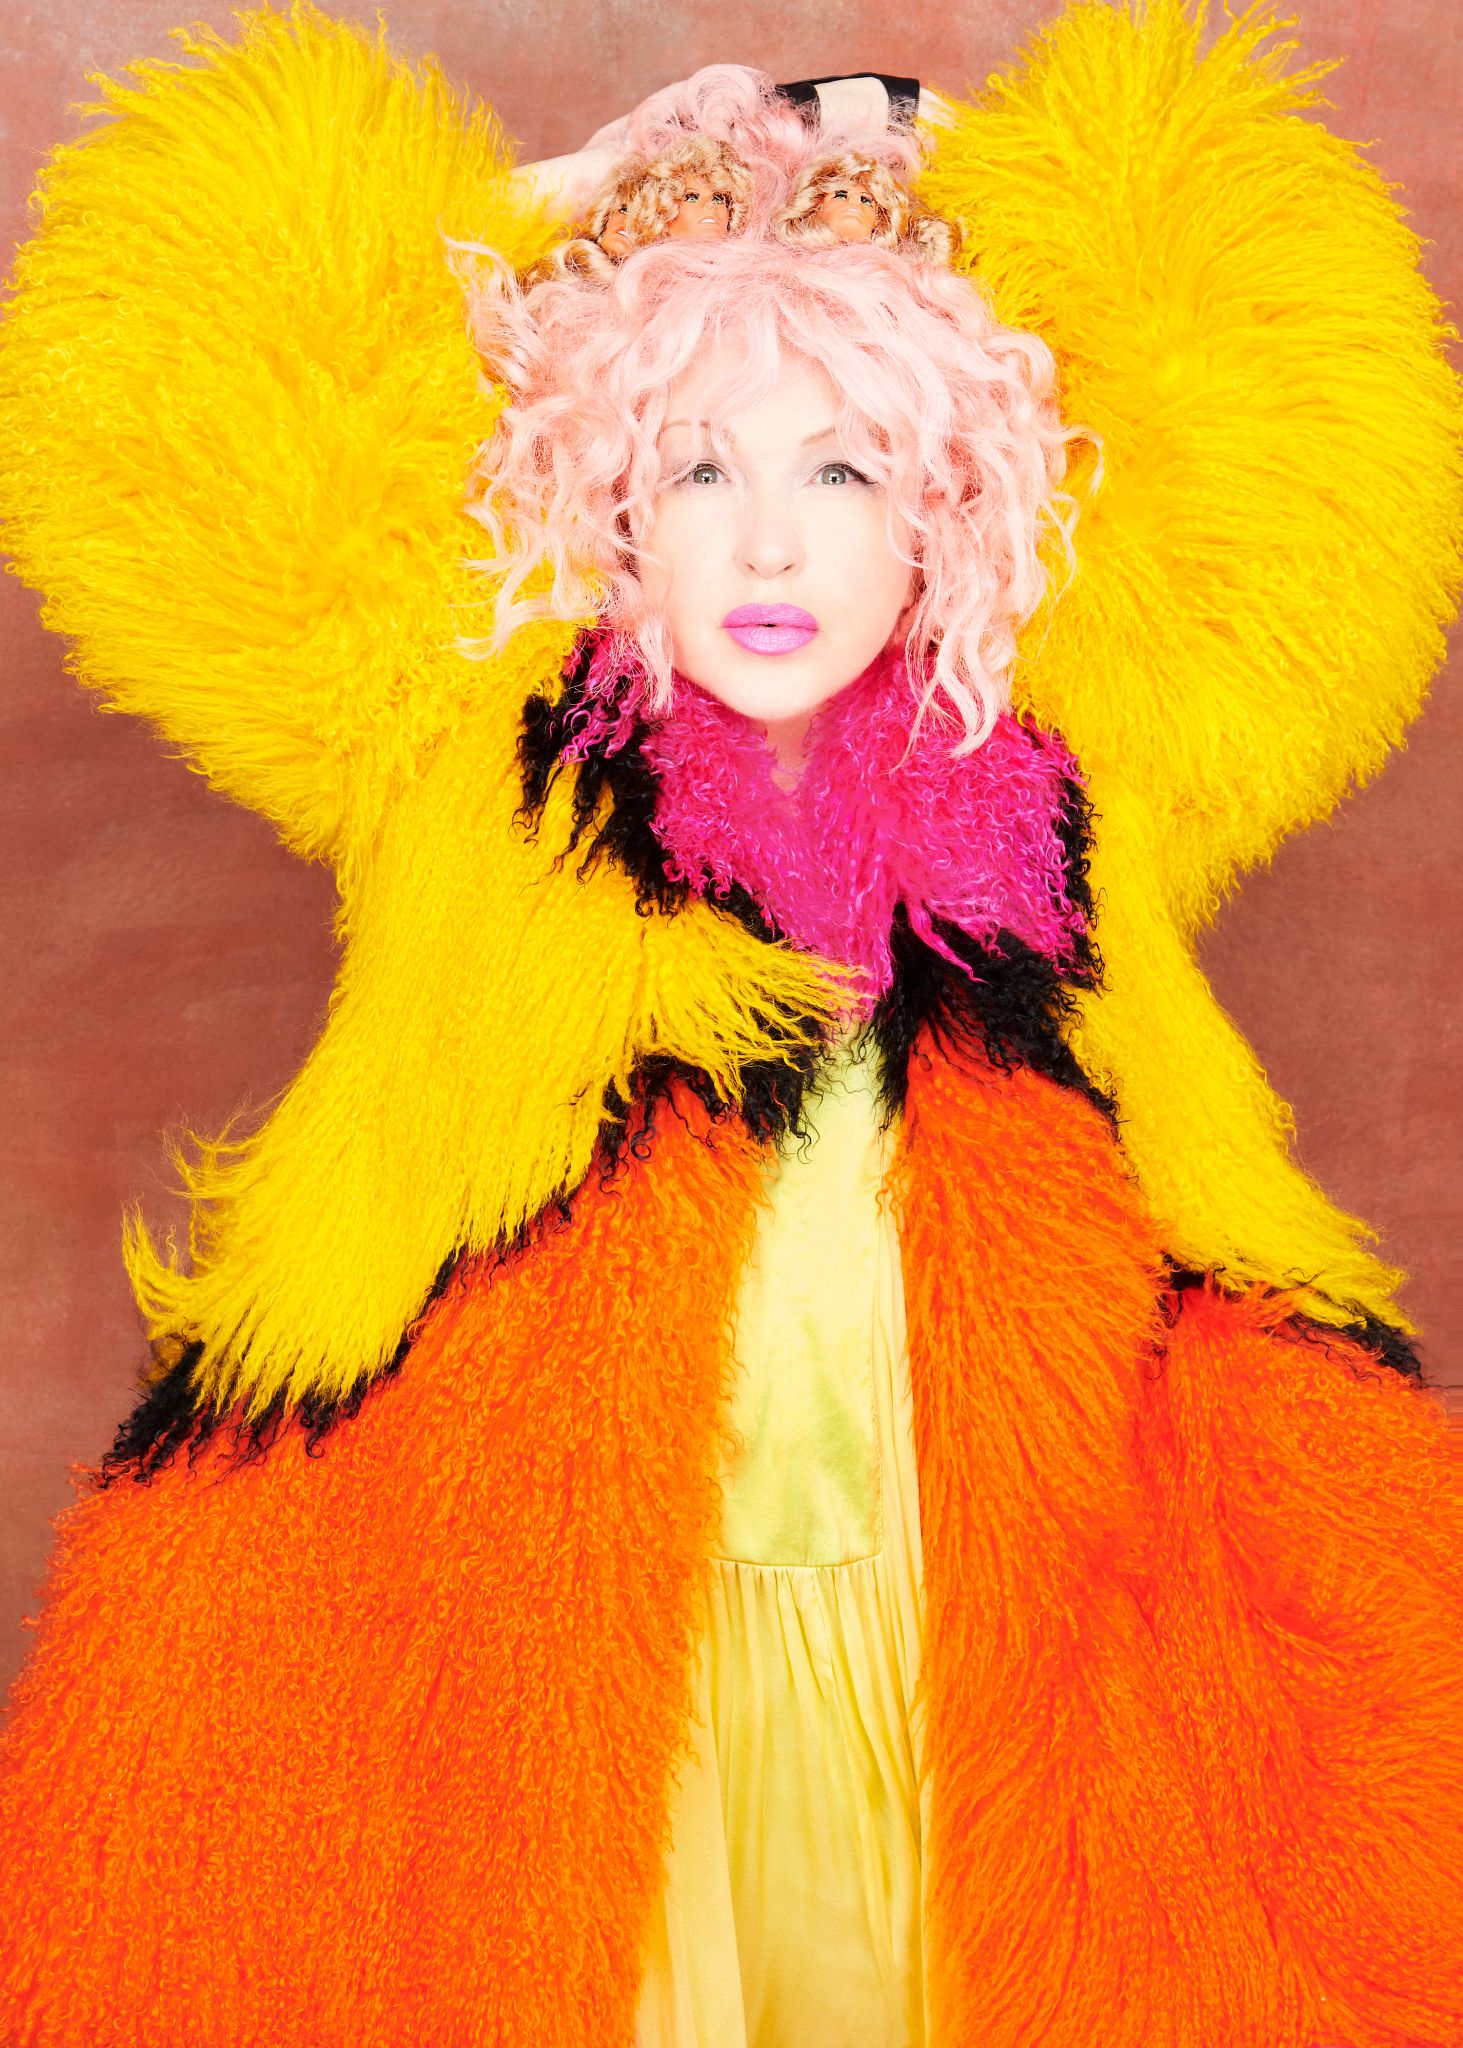 Singer Cyndi Lauper wearing a colorful yellow, red and pink outfit that covers her arms along with three toy doll heads attached to her hair